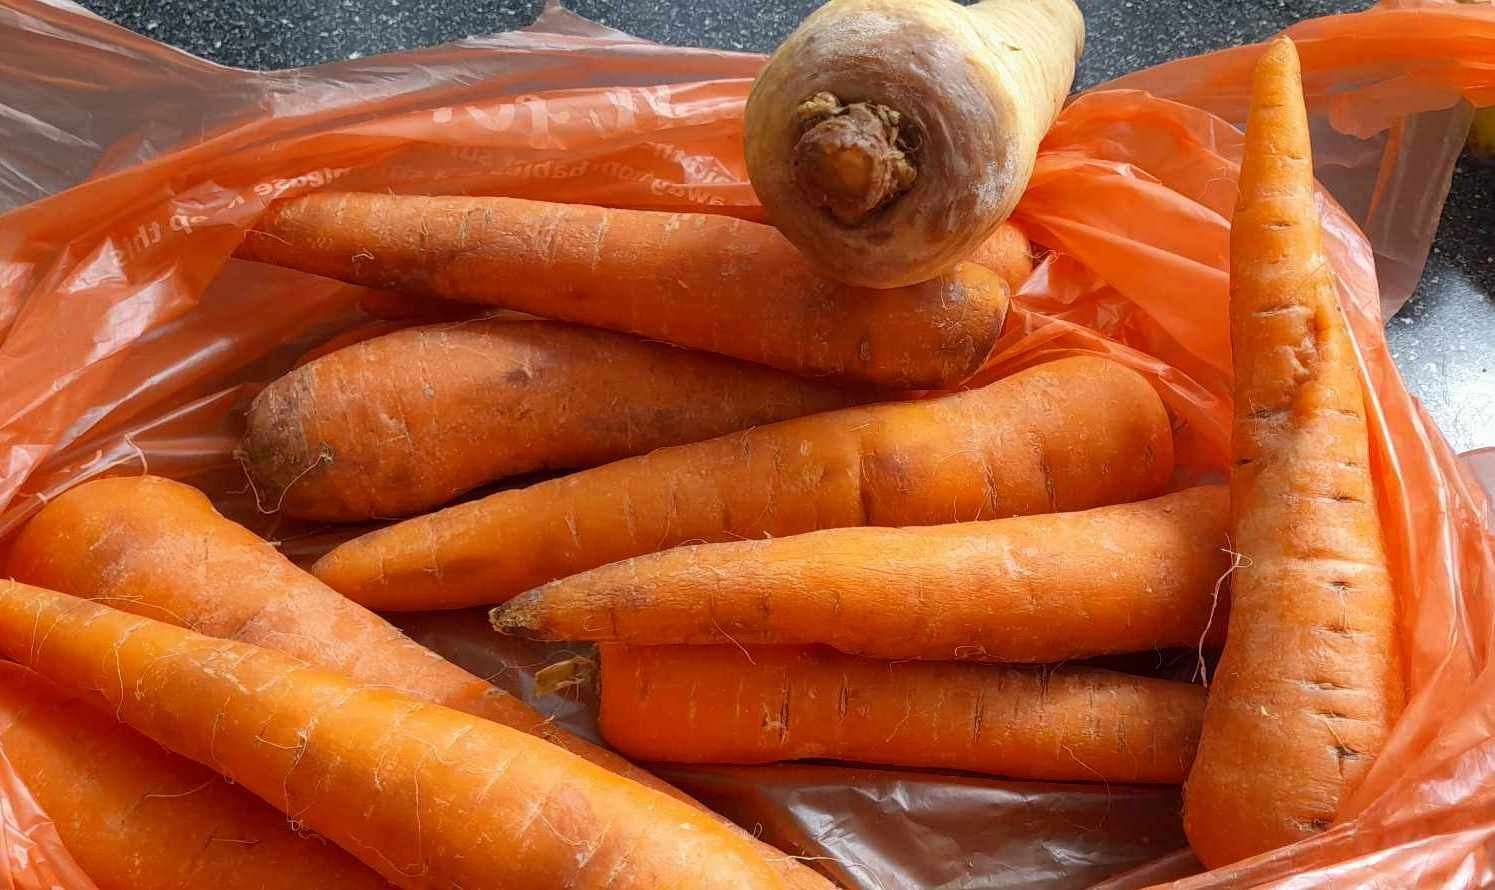 Nichola Jarvis says she was surprised to have received a kilo of mouldy carrots in her Sainsbury's delivery. All pictures: Nichola Jarvis